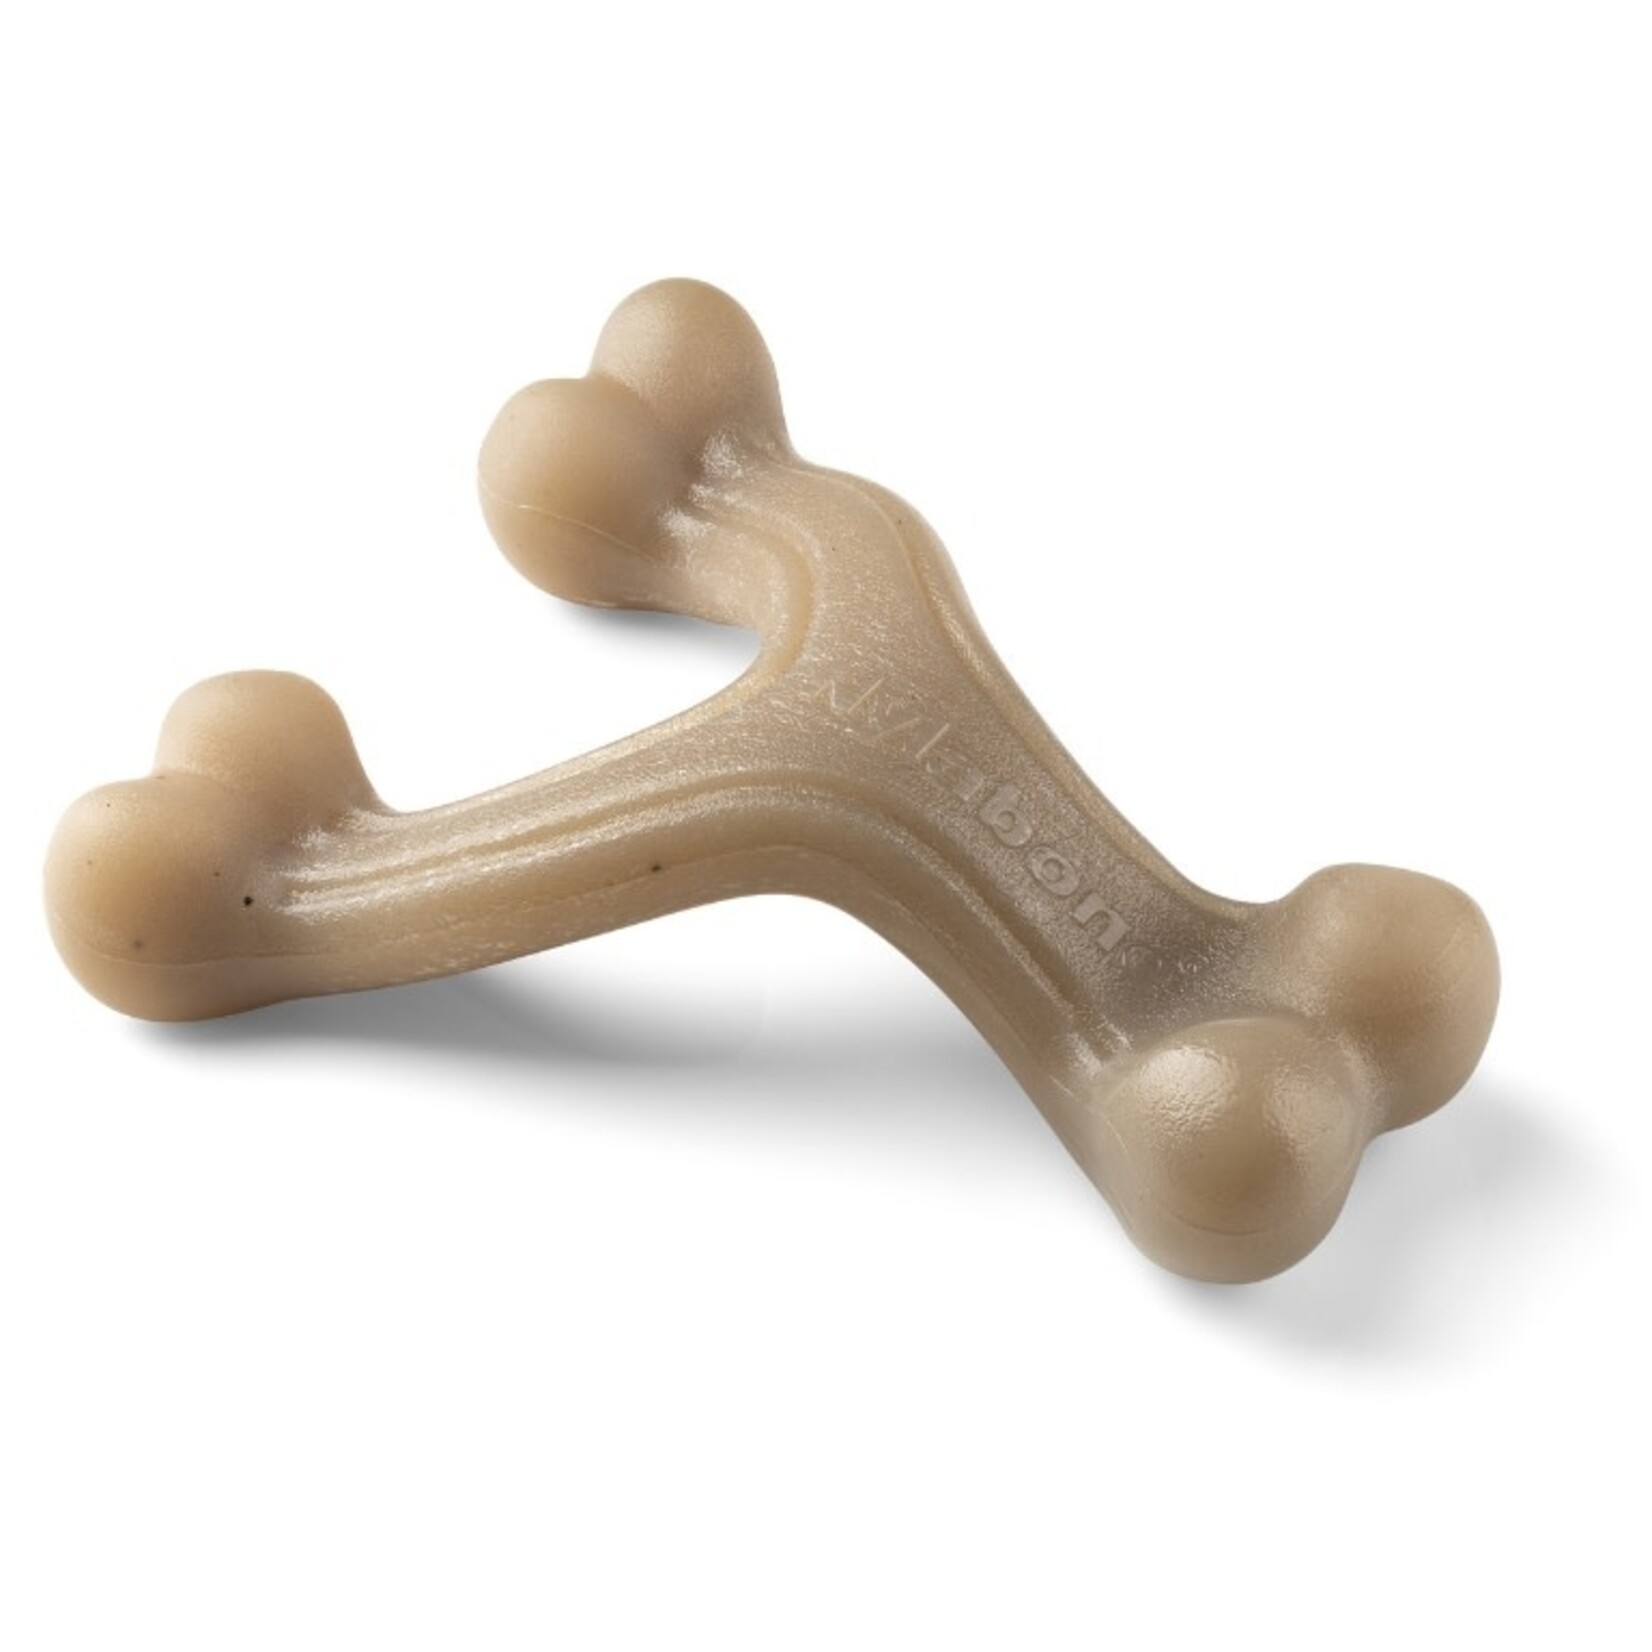 Nylabone Puppy Gourmet Wishbone Strong Chew Toy, Peanut Butter, Small